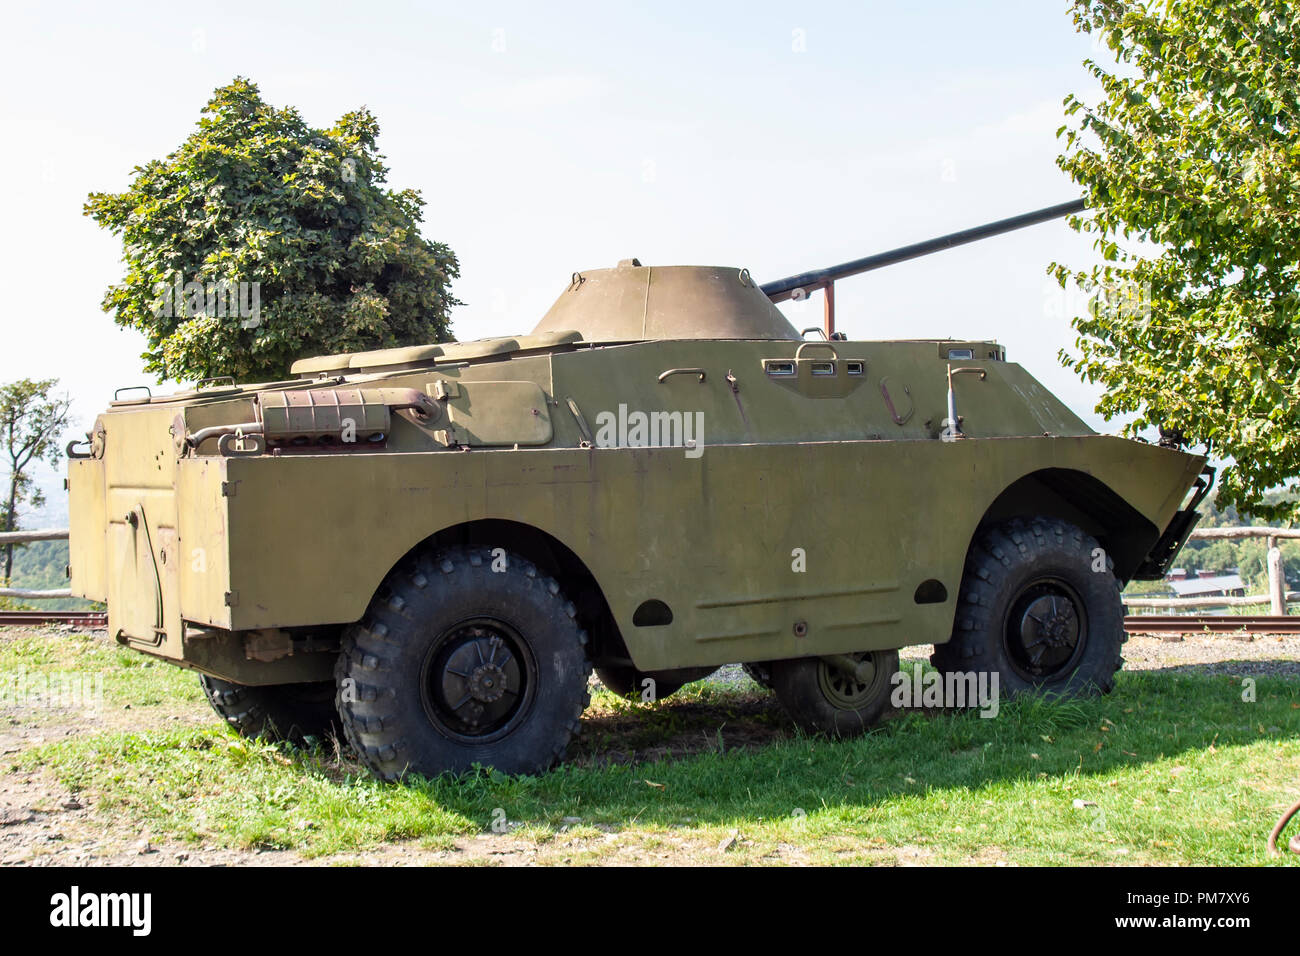 Tank military vehicle with landscape background Stock Photo